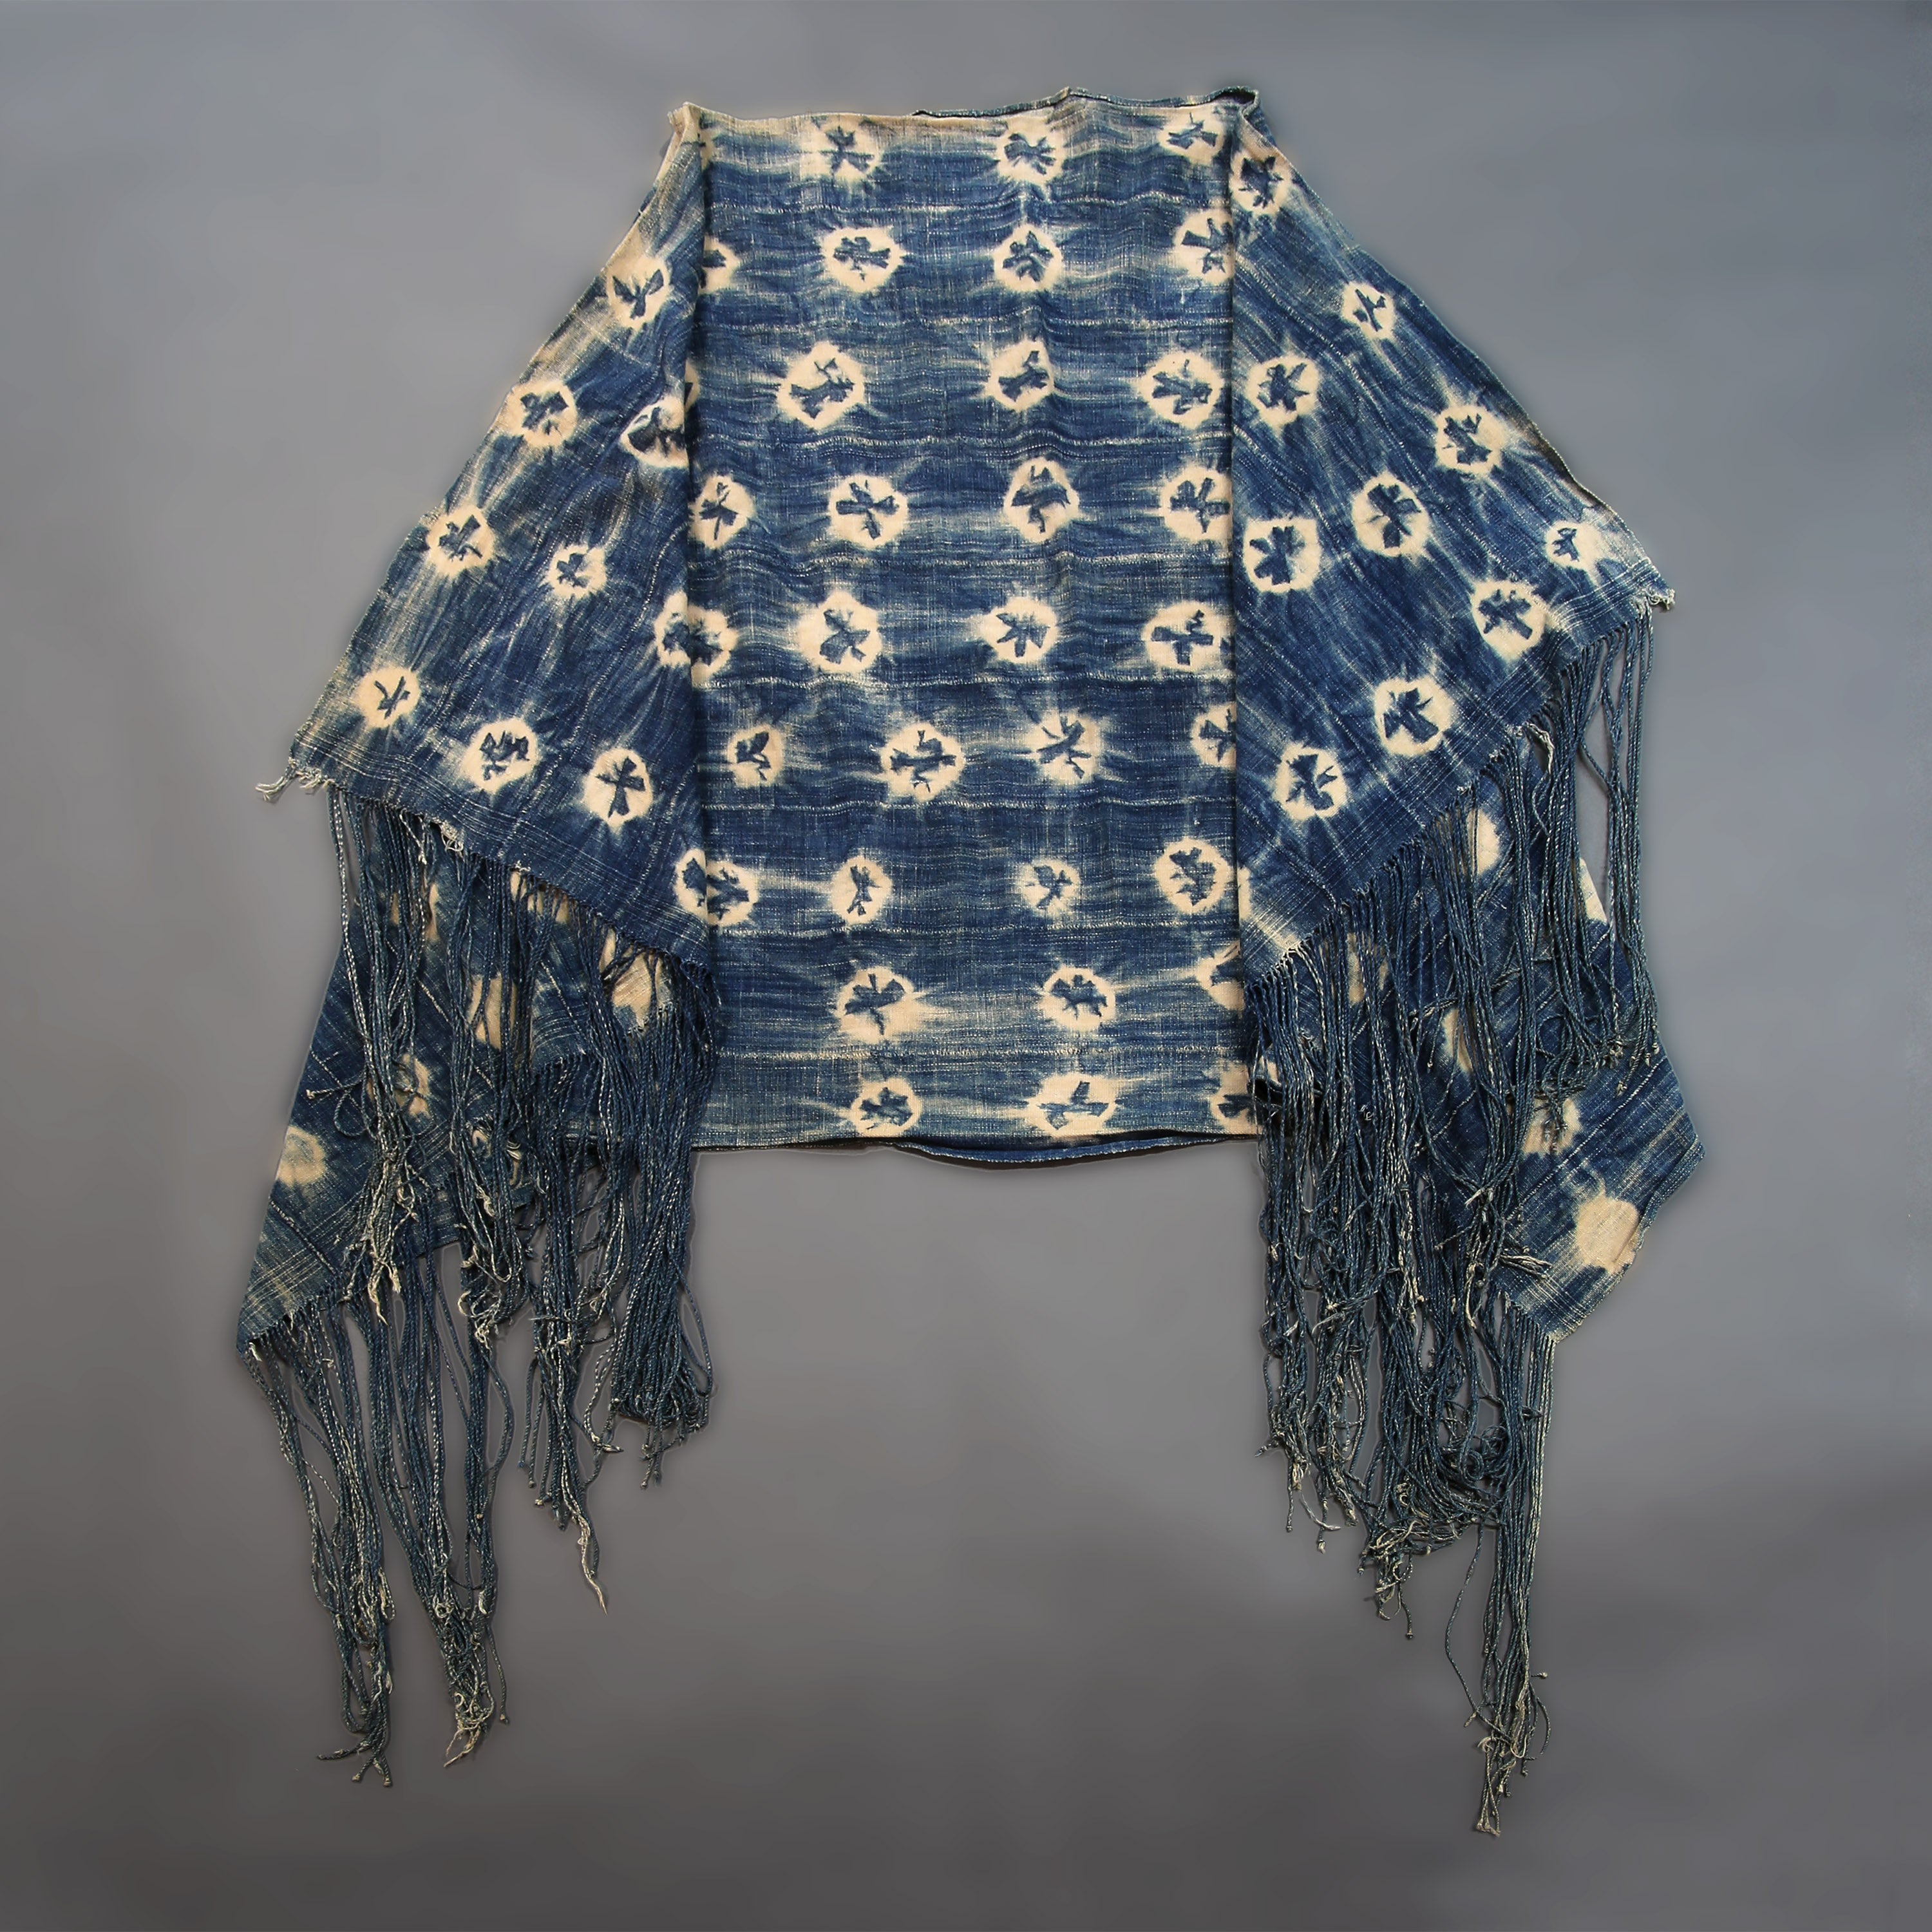 Handcrafted Textiles - Artisan Designed - Handcrafted African Art Textiles - Home Decor - Living Spaces - Mix Colors - Bold Patterns - Traditional Designs - African Culture - This Faded Indigo Scarf Tie Dye Fabric is a vintage African textile shawl that combines a signature faded blue hue with classic tie dye pattern. Crafted from high-quality fabric, this shawl is sure to bring a timeless style to your wardrobe. 60